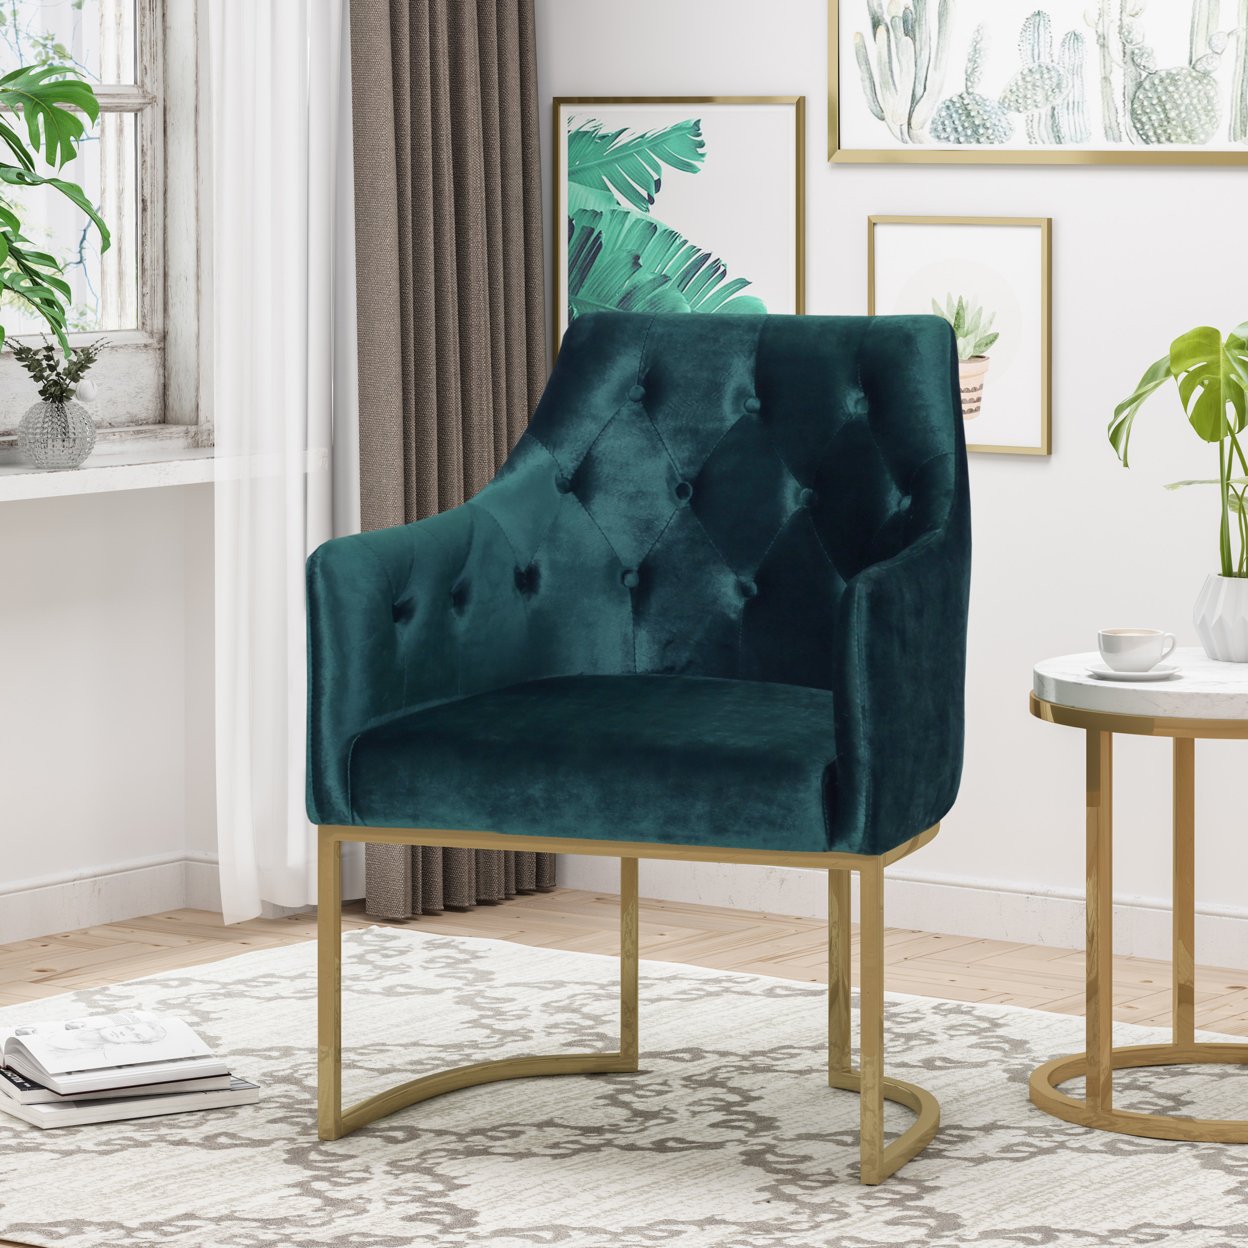 Fern Modern Tufted Glam Accent Chair With Velvet Cushions And U-Shaped Base - Teal + Gold